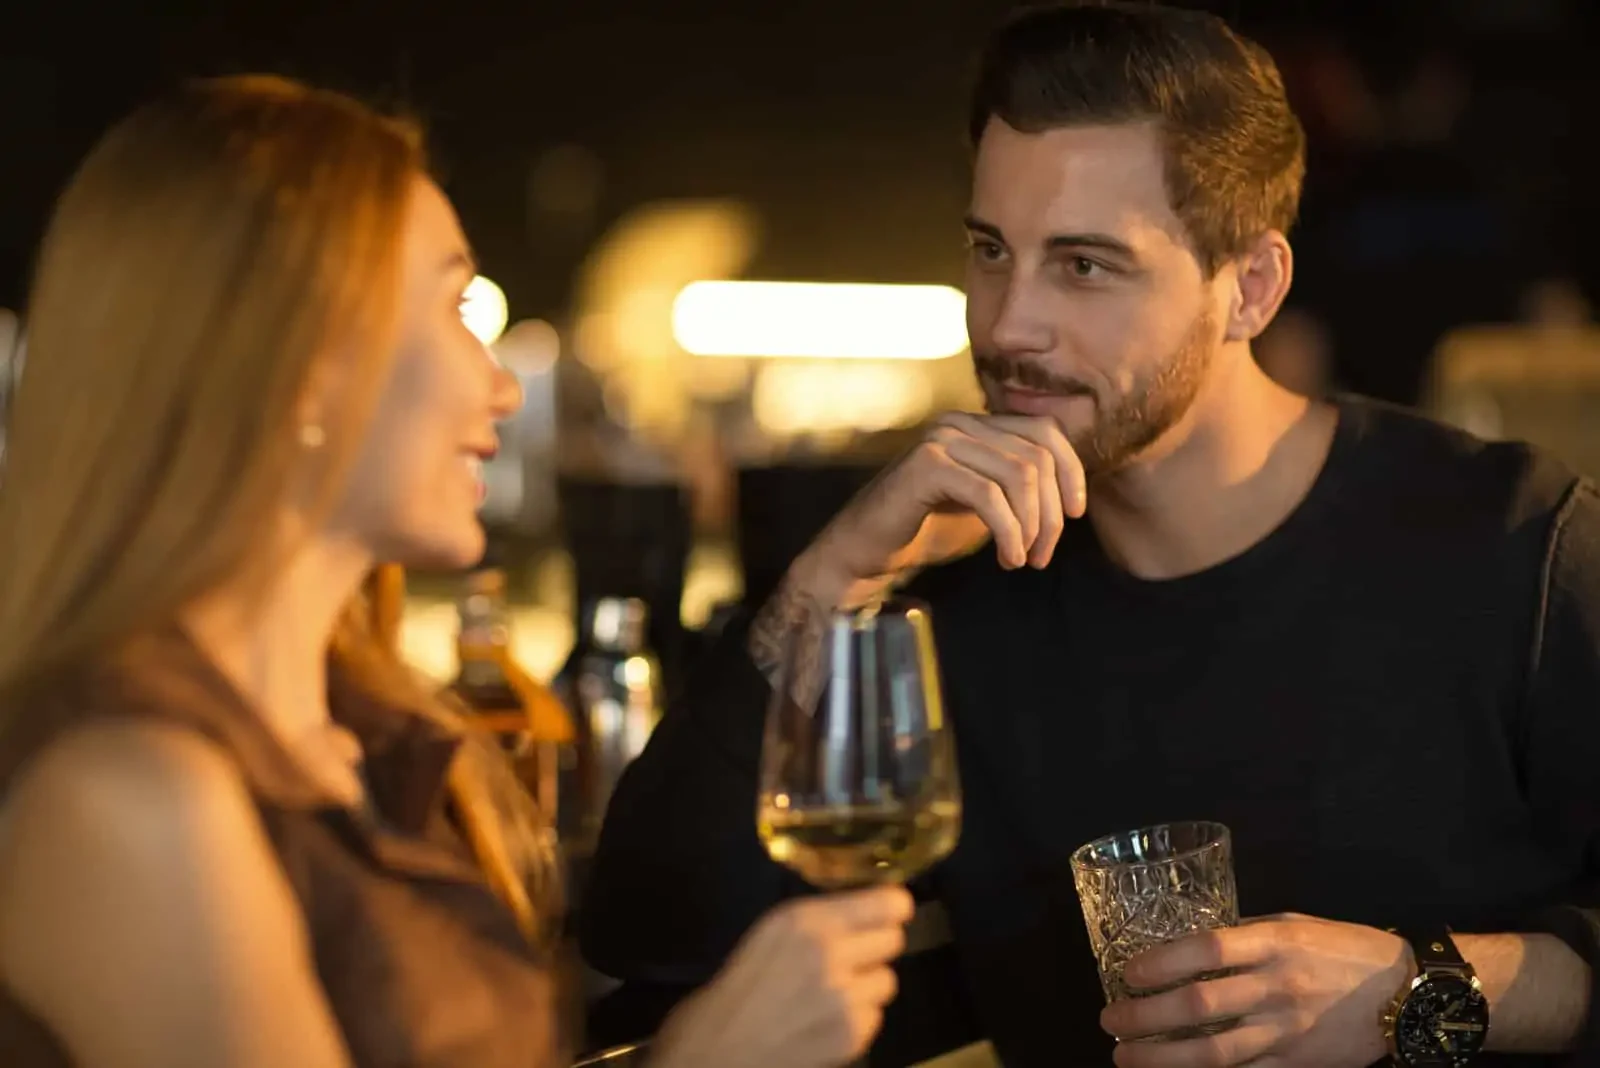 a man talking to a woman while drinking wine